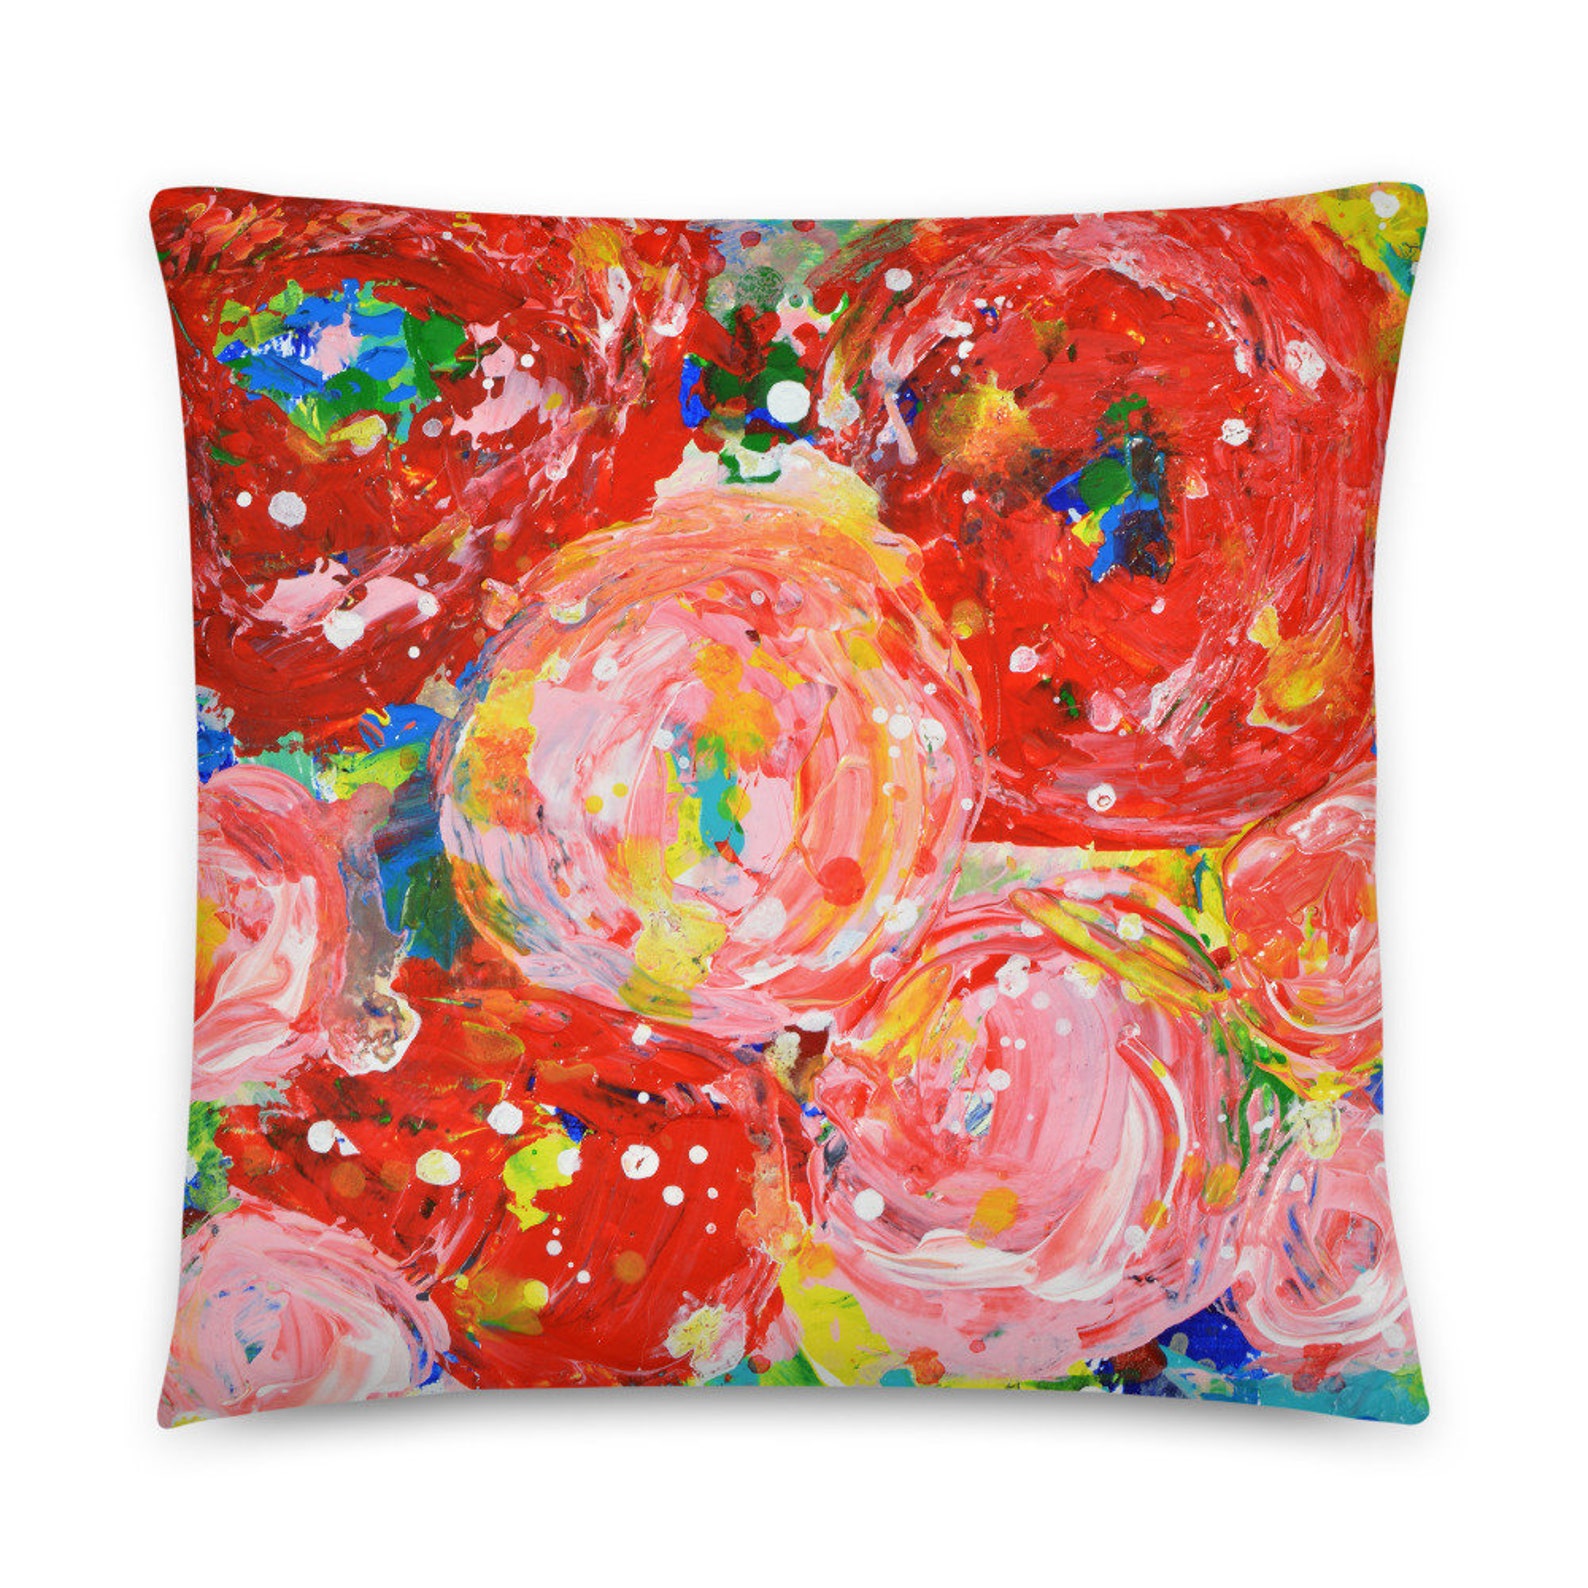 Katie Jeanne Wood - floral throw pillow